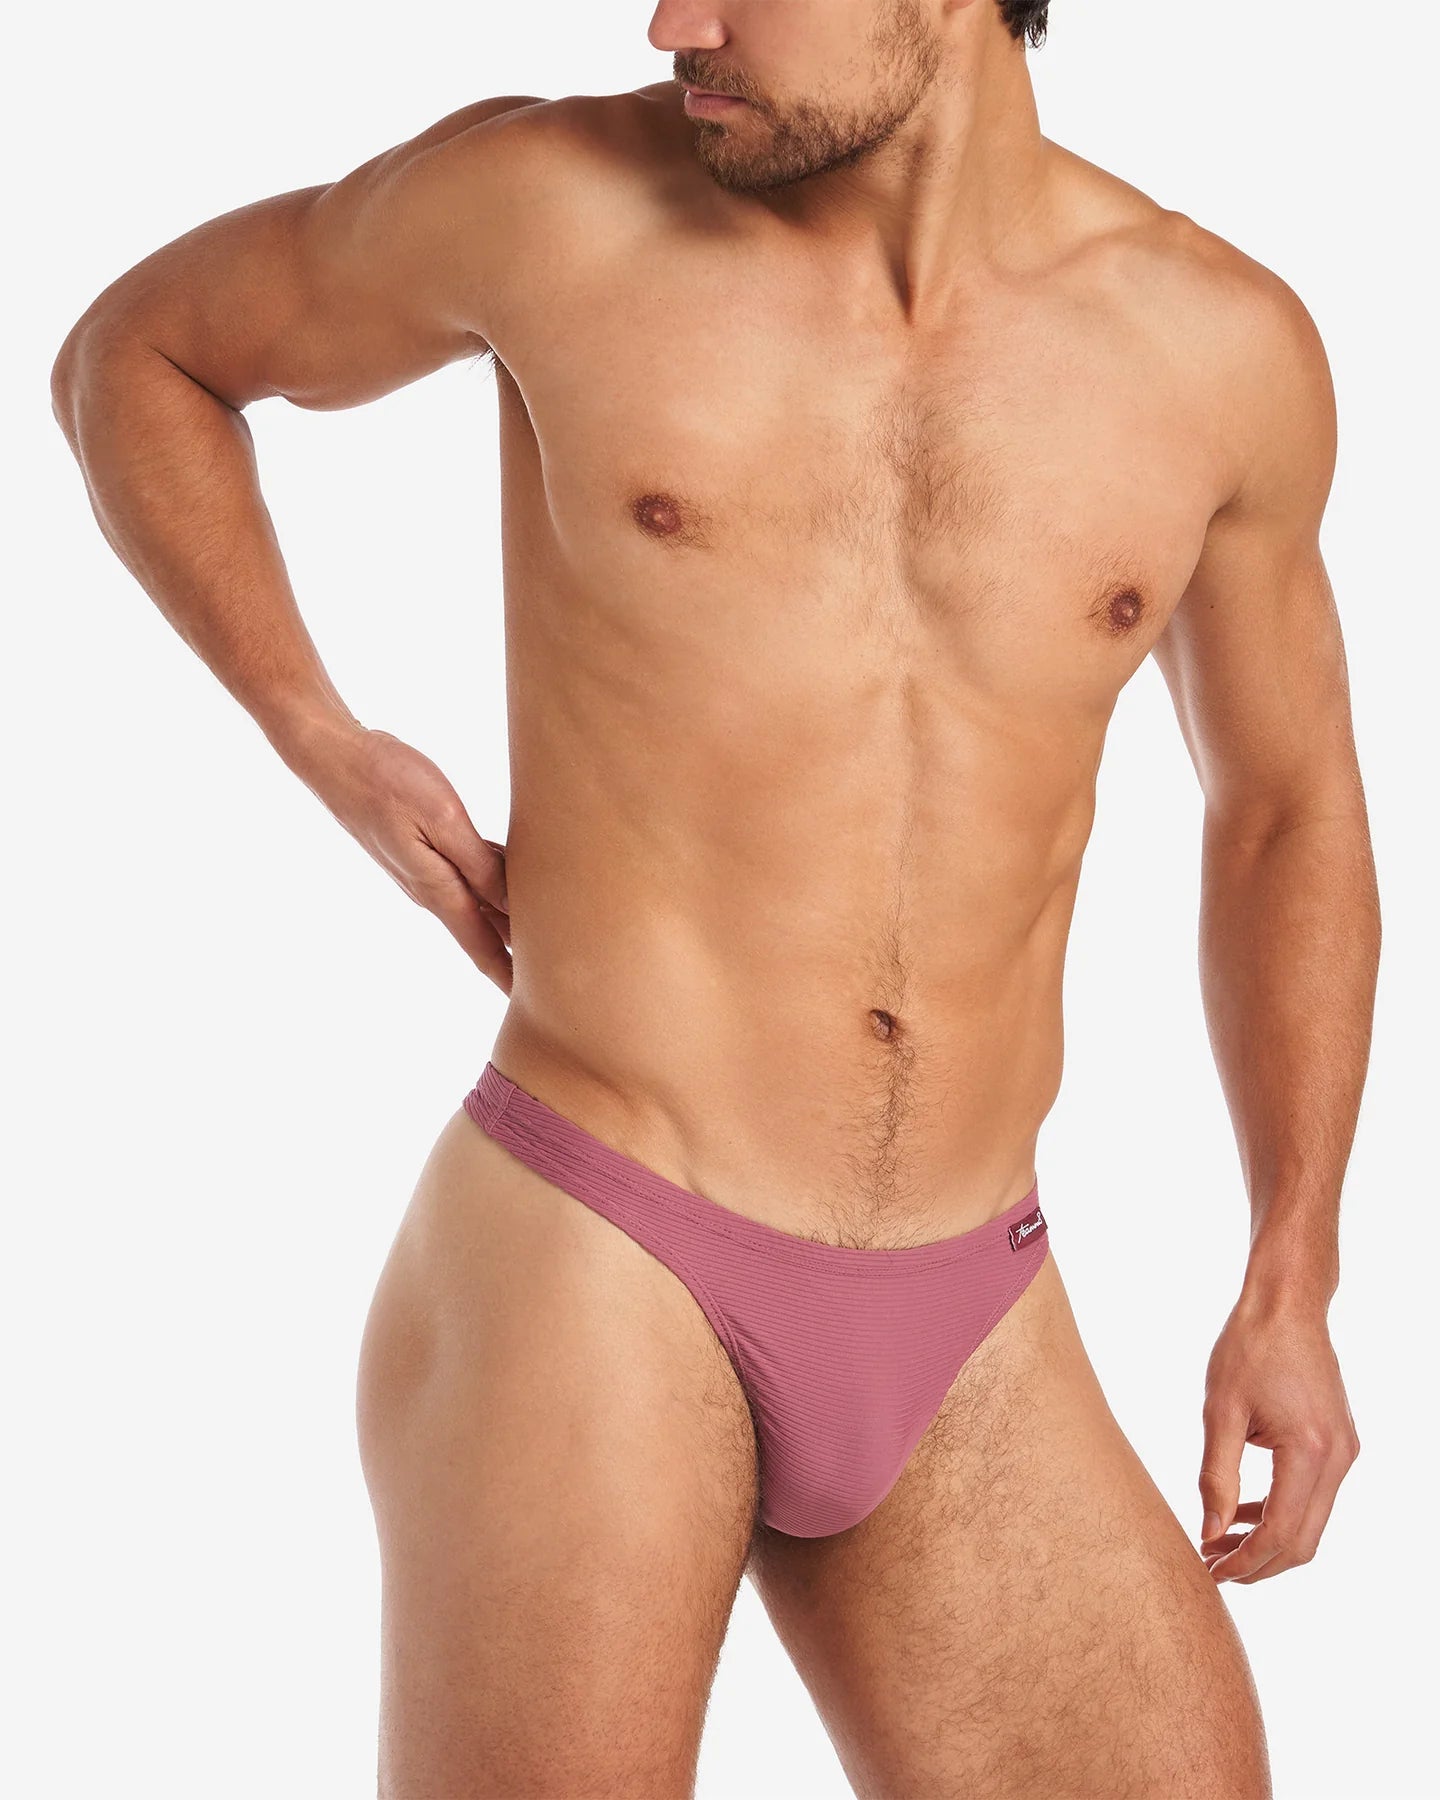 Teamm8 Eclipse thong crushed berry